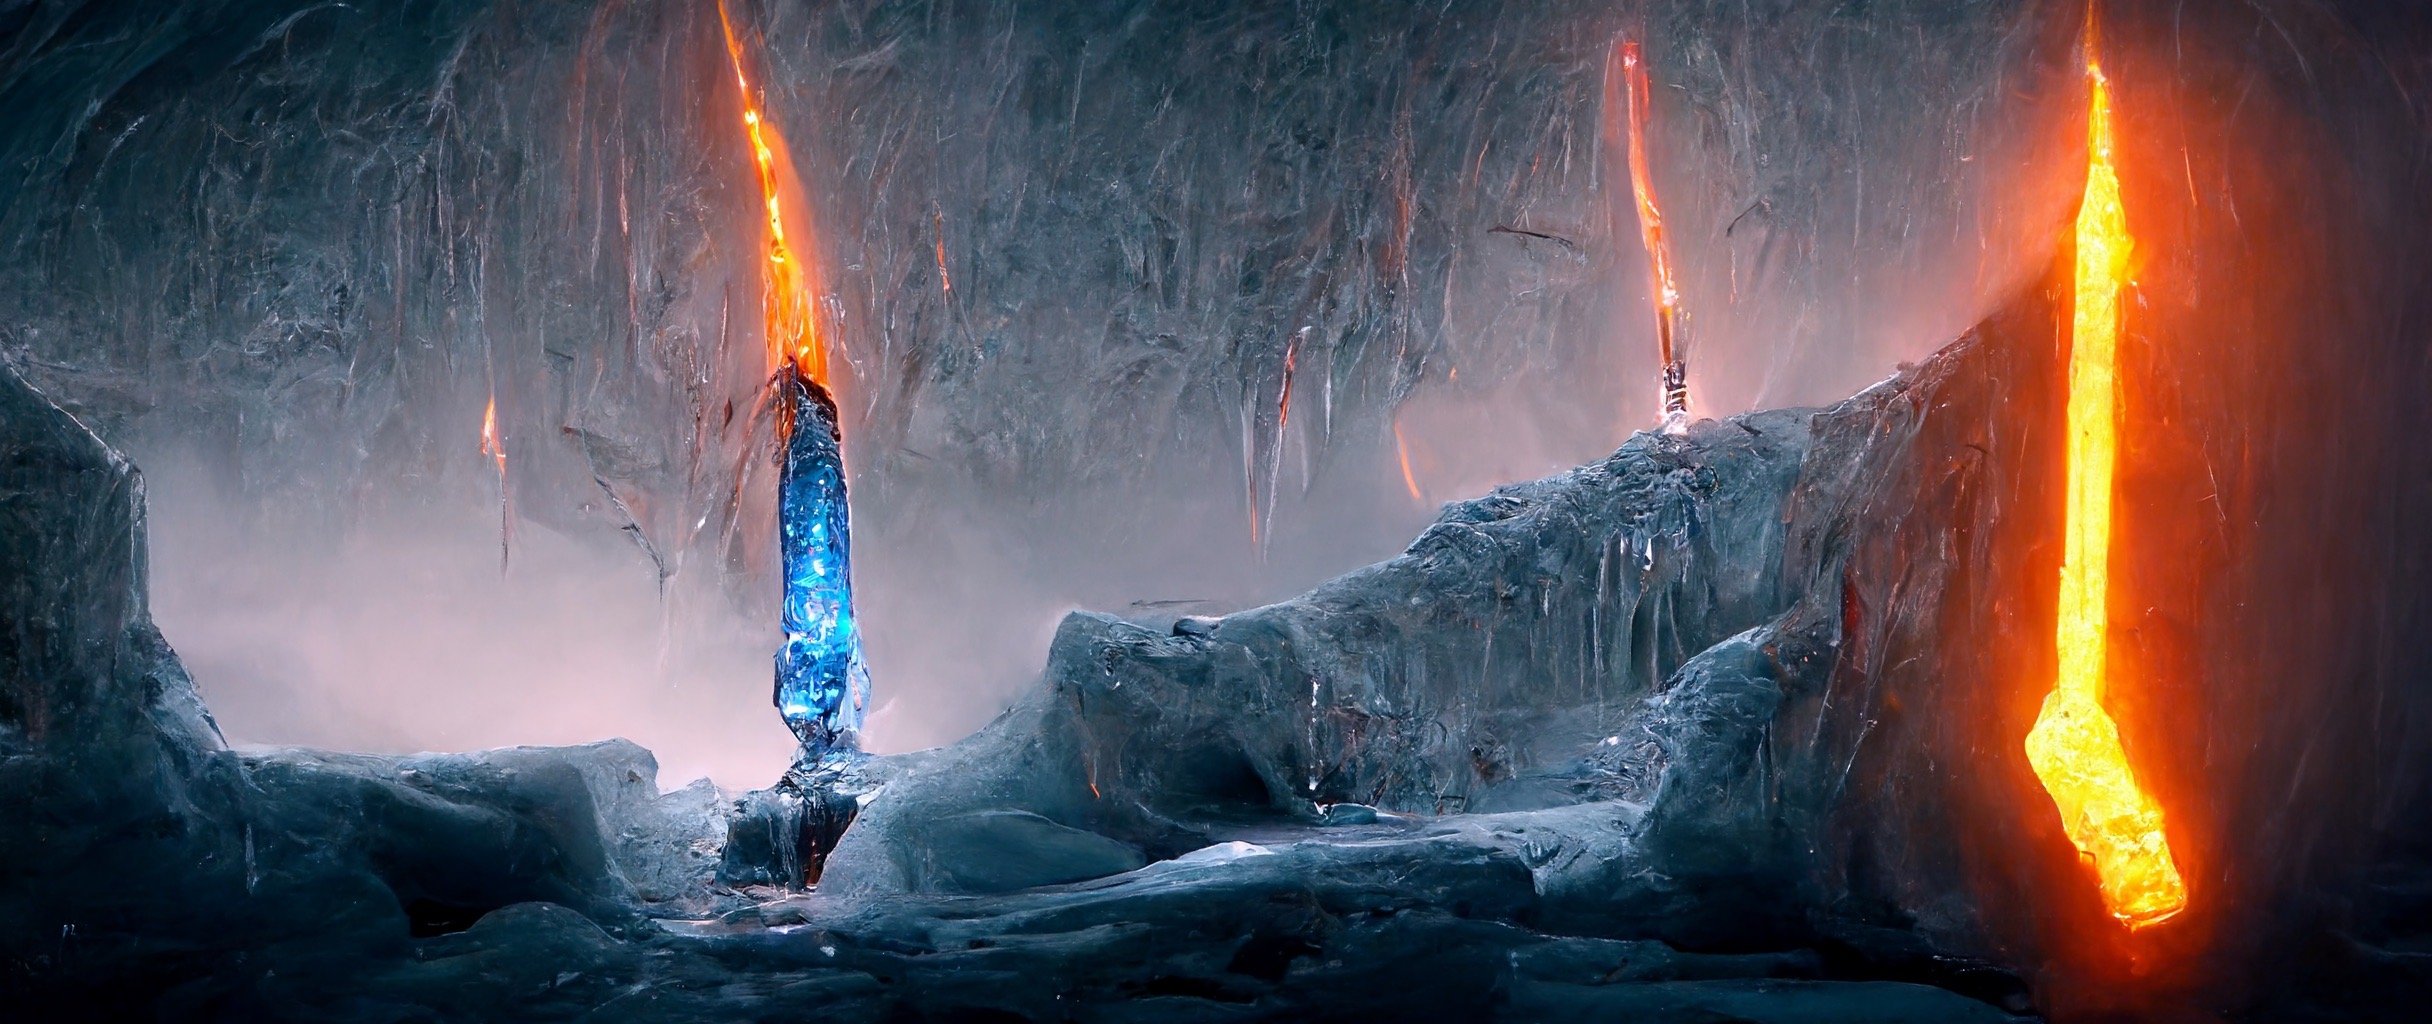 e476c6ad-9b59-432b-ada7-c6ae744af17a_S3RAPH_frozen_sword_in_ice_cave_with_reflective_crystals._epic_lava_falls._8k_cinematic_composition_render_.JPG